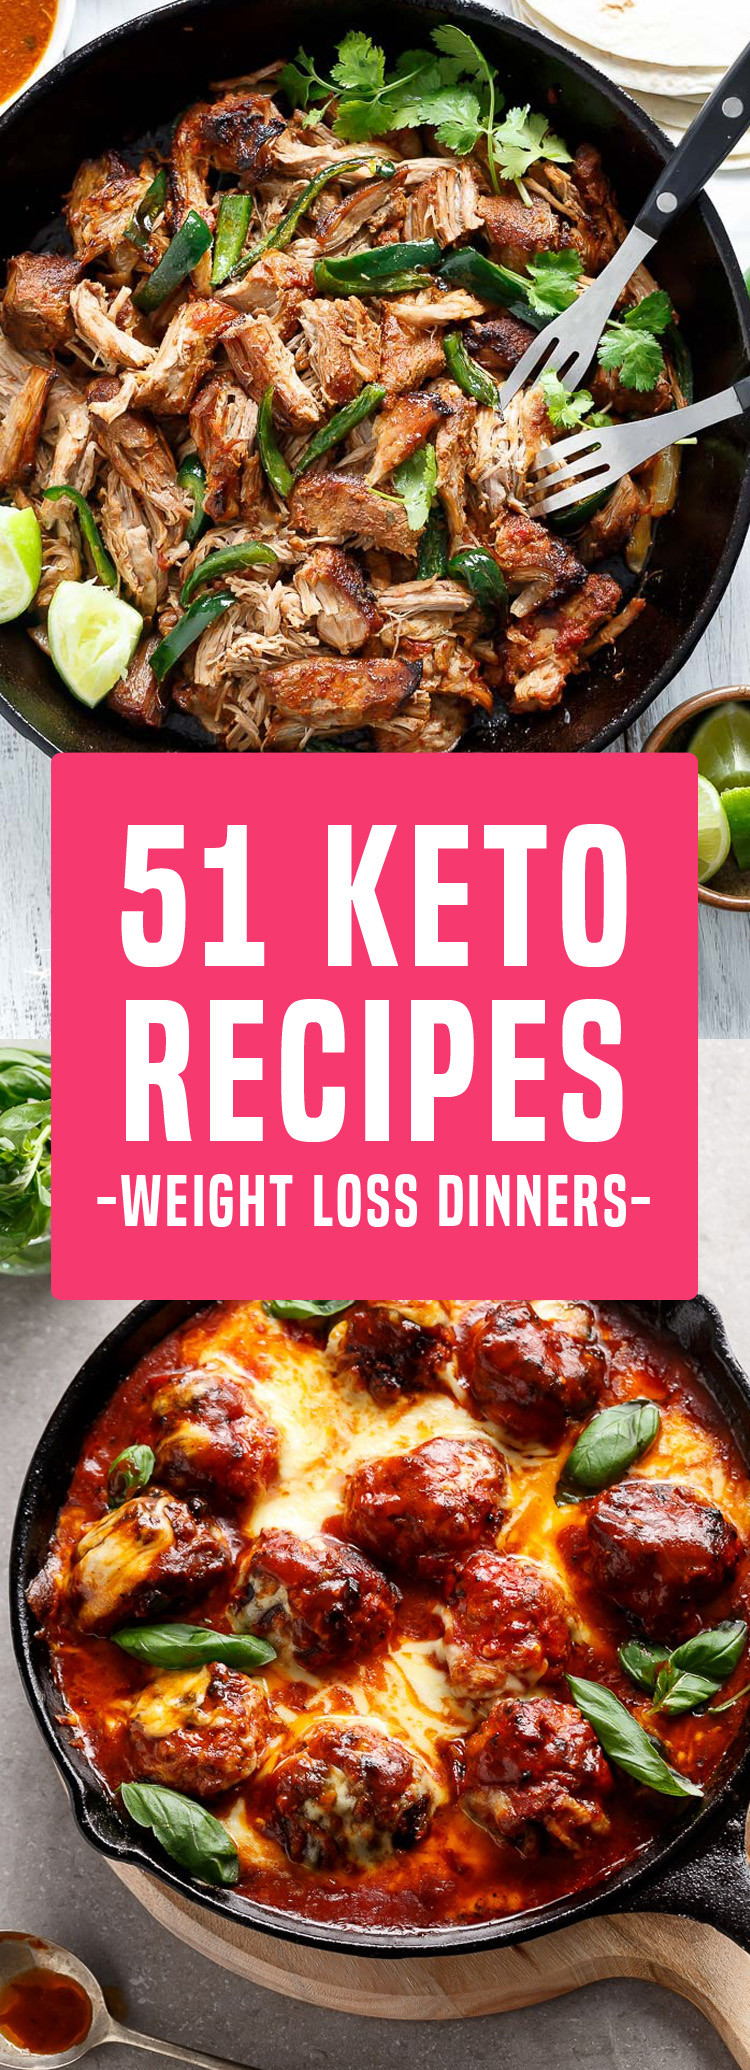 Keto Diet Dinner Recipes
 51 Delicious Keto Recipes That Make The Perfect Weight